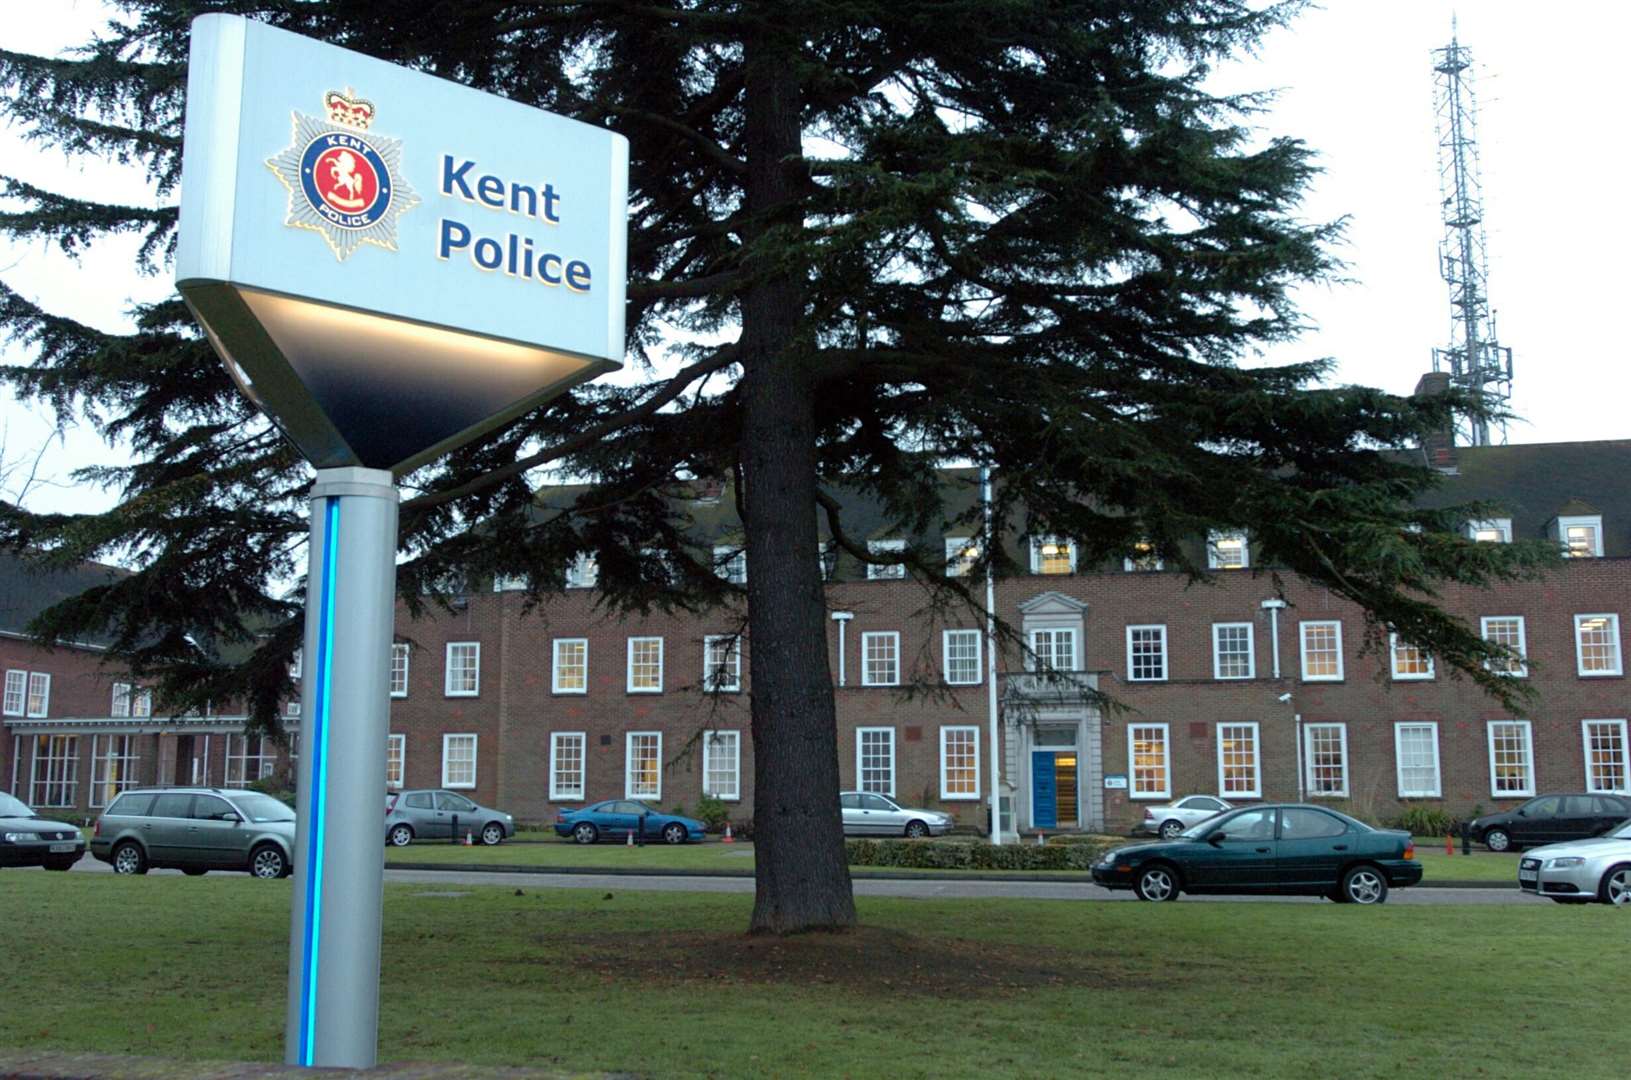 The officer has been suspended by Kent Police and is the subject of a criminal investigation